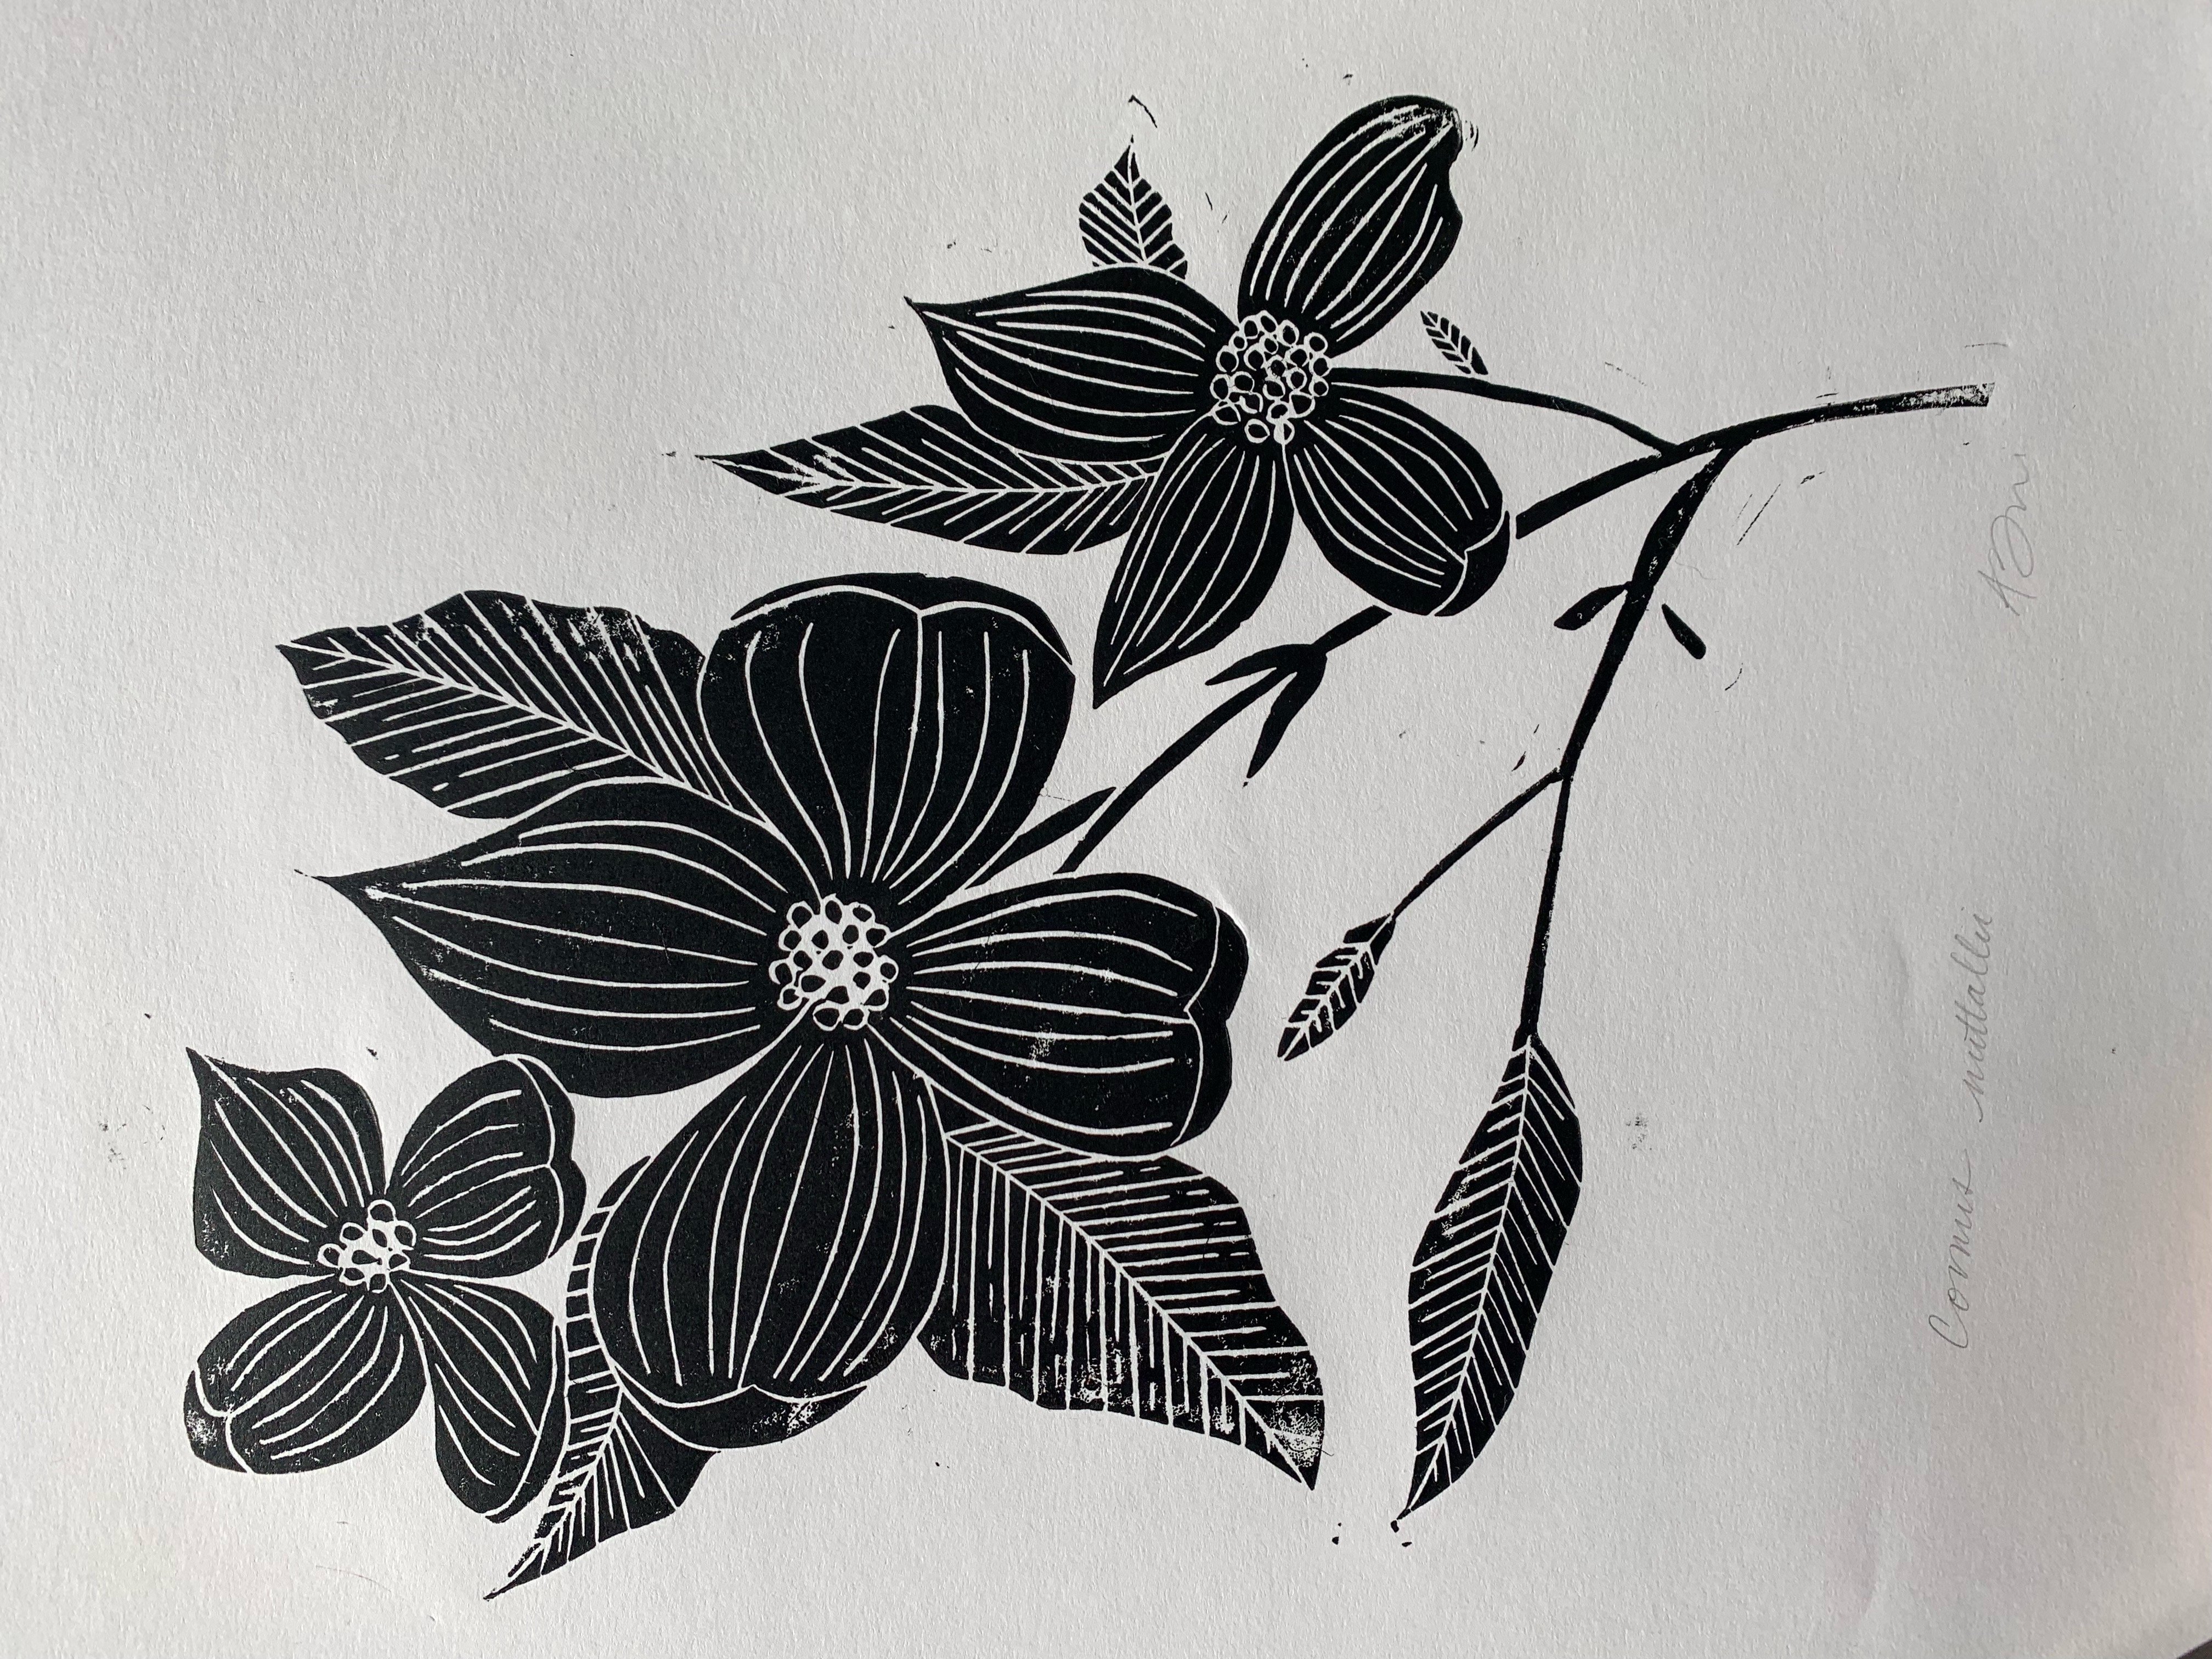 Block print of Pacific dogwood in black ink on white paper.